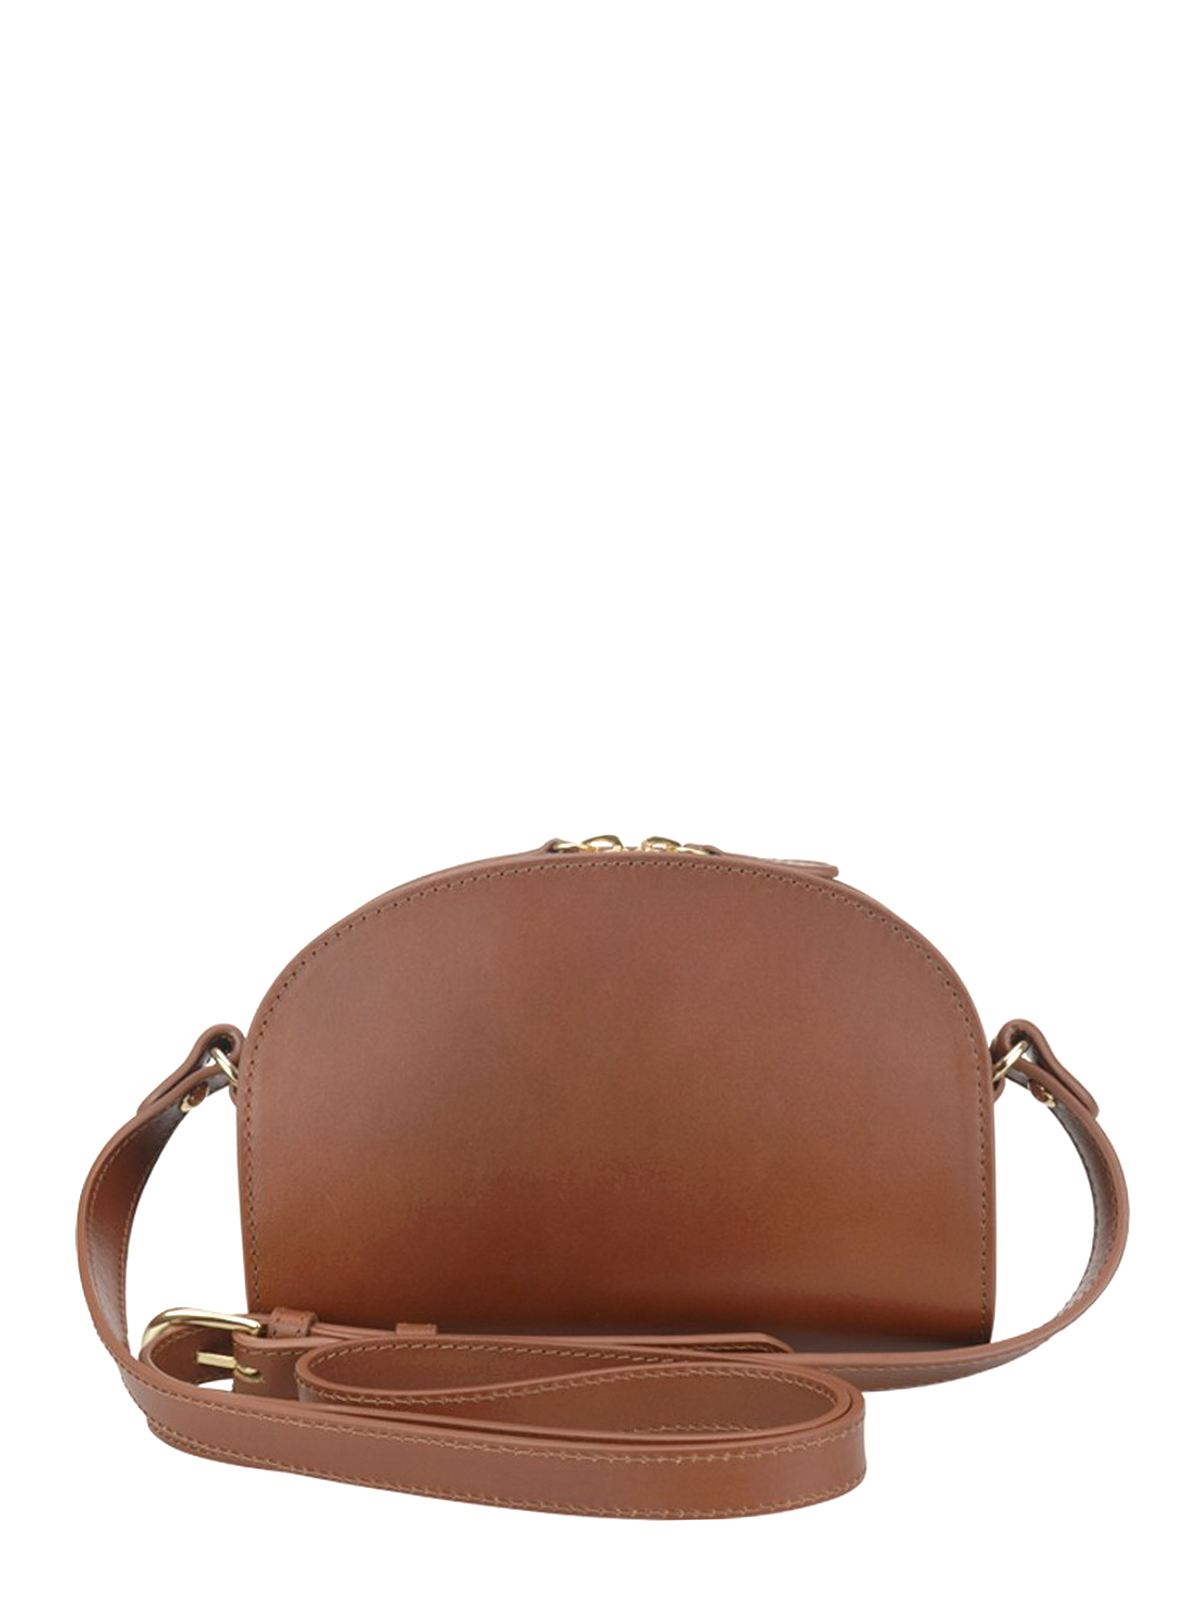 Cross body bags A.P.C. - Brown leather half-moon bag - PXAWVF61392CAD